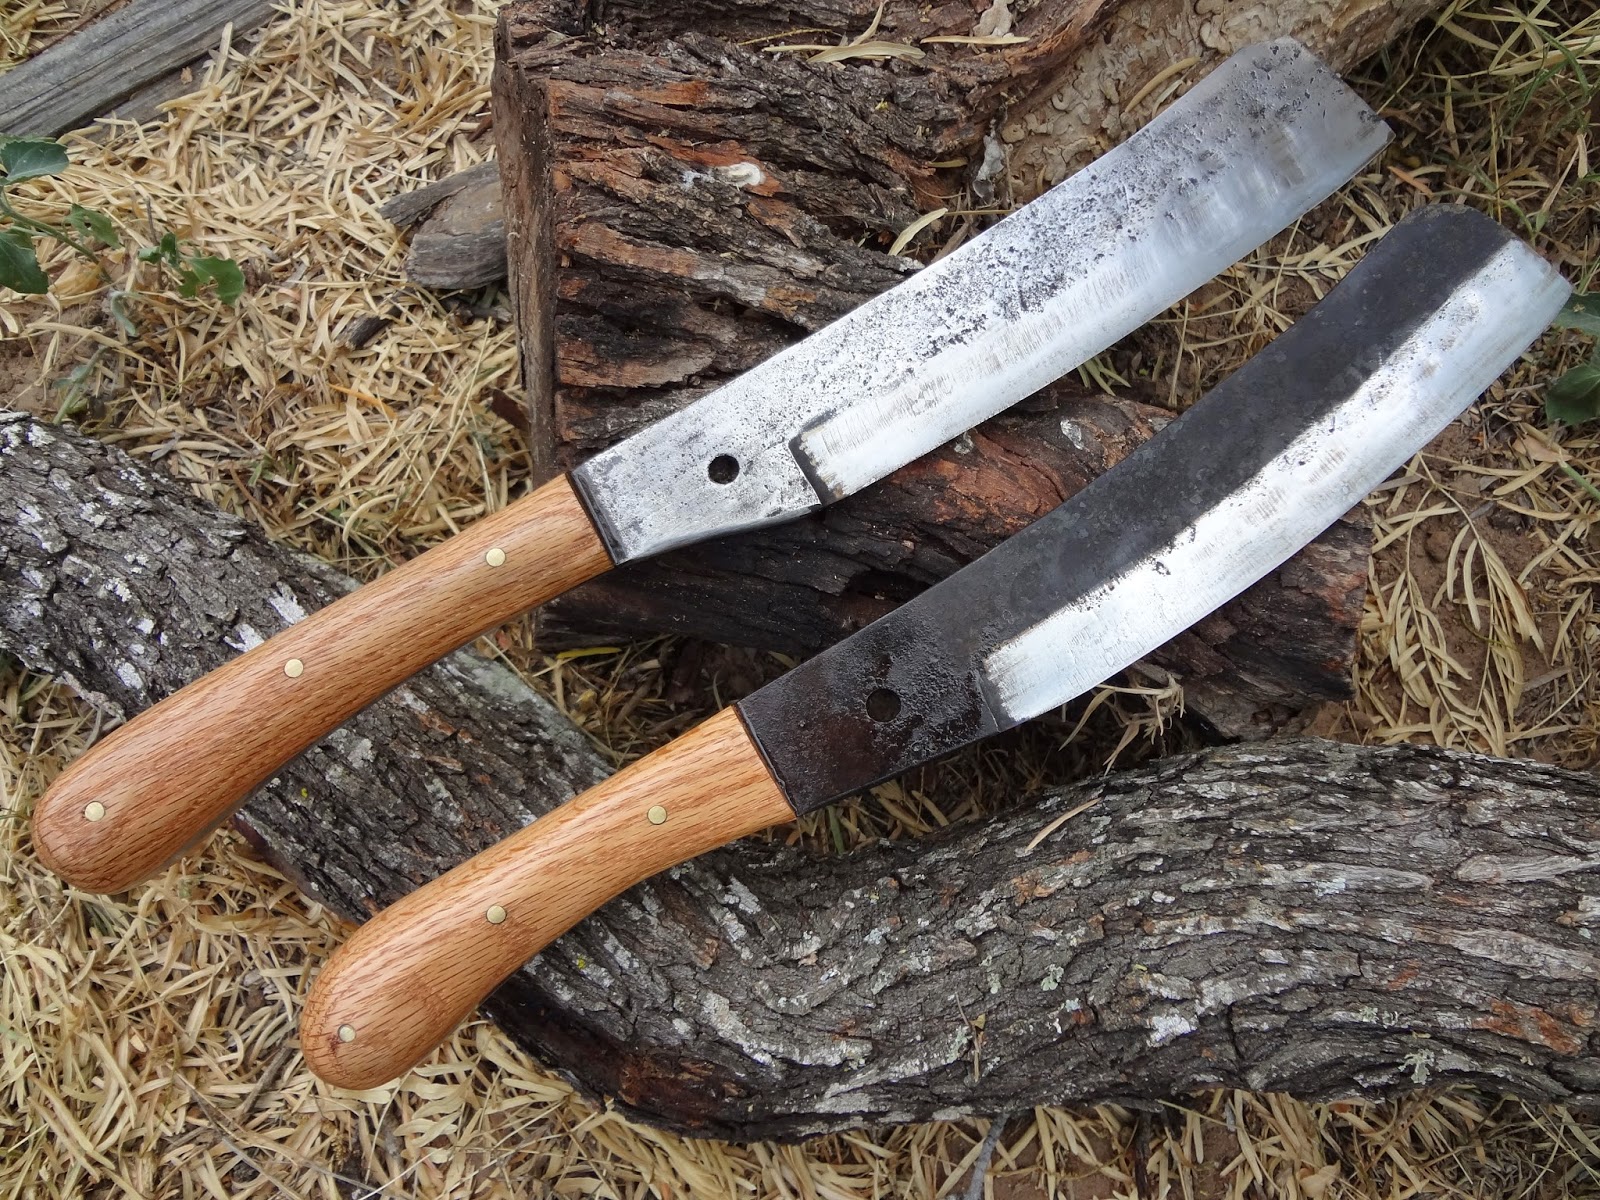 Woods Roamer: Notes on the BP Security Machete in a Land 